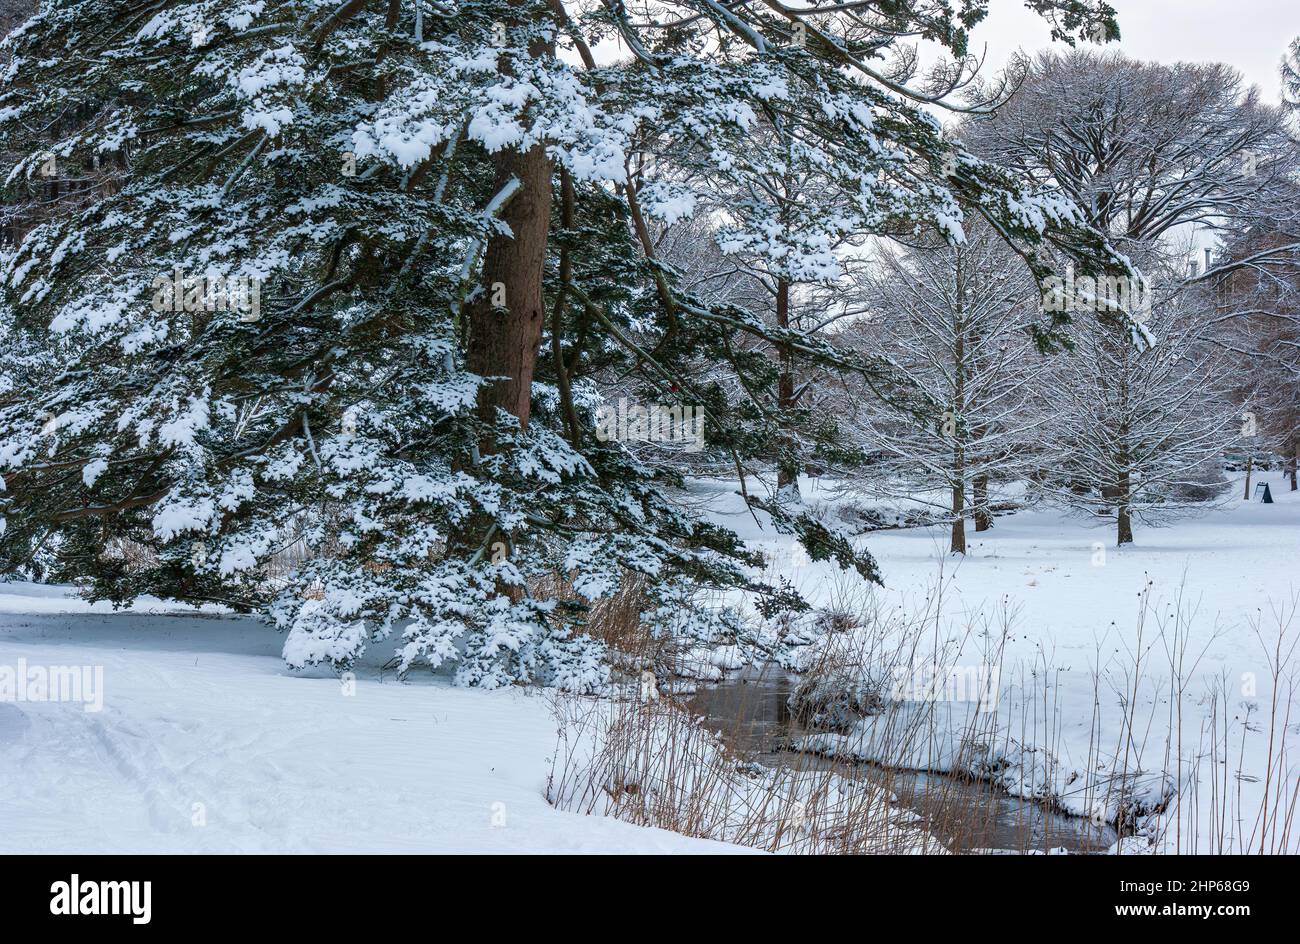 A wintry landscape with a snow-covered Norway spruce (Picea abies) by a brook. Bald cypress (Taxodium distichum) in the back. Arnold Arboretum, Boston Stock Photo